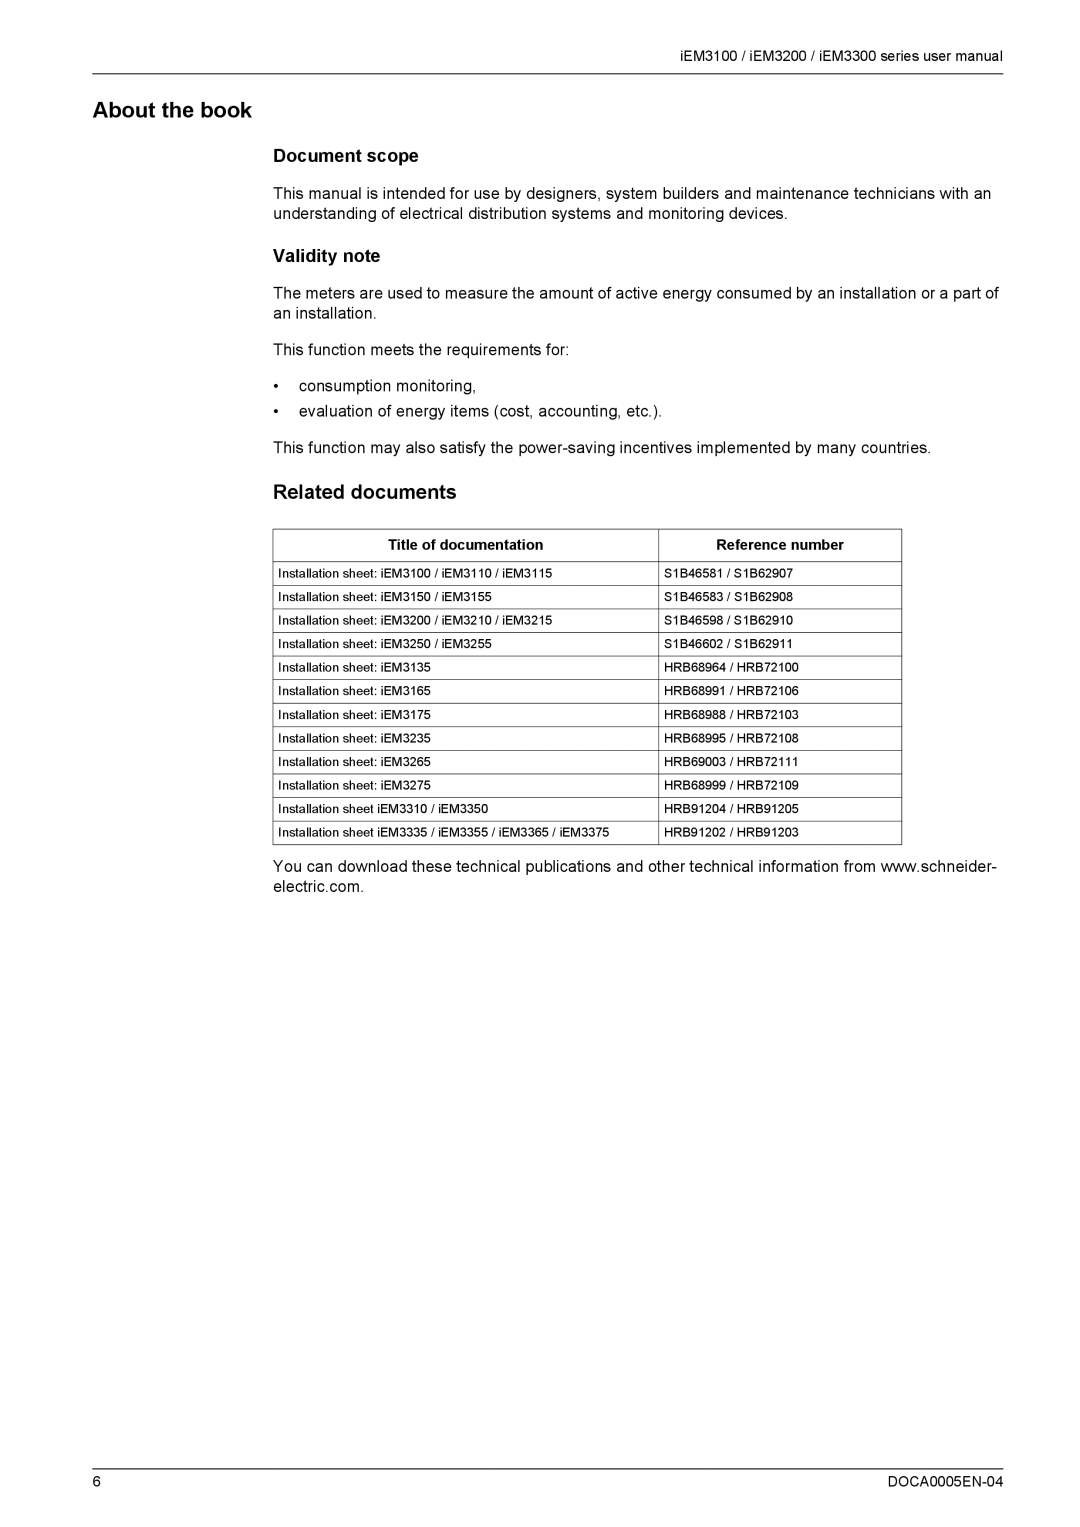 Schneider Electric iEM3300, iEM3200, iEM3100 user manual About the book, Related documents, Document scope, Validity note 